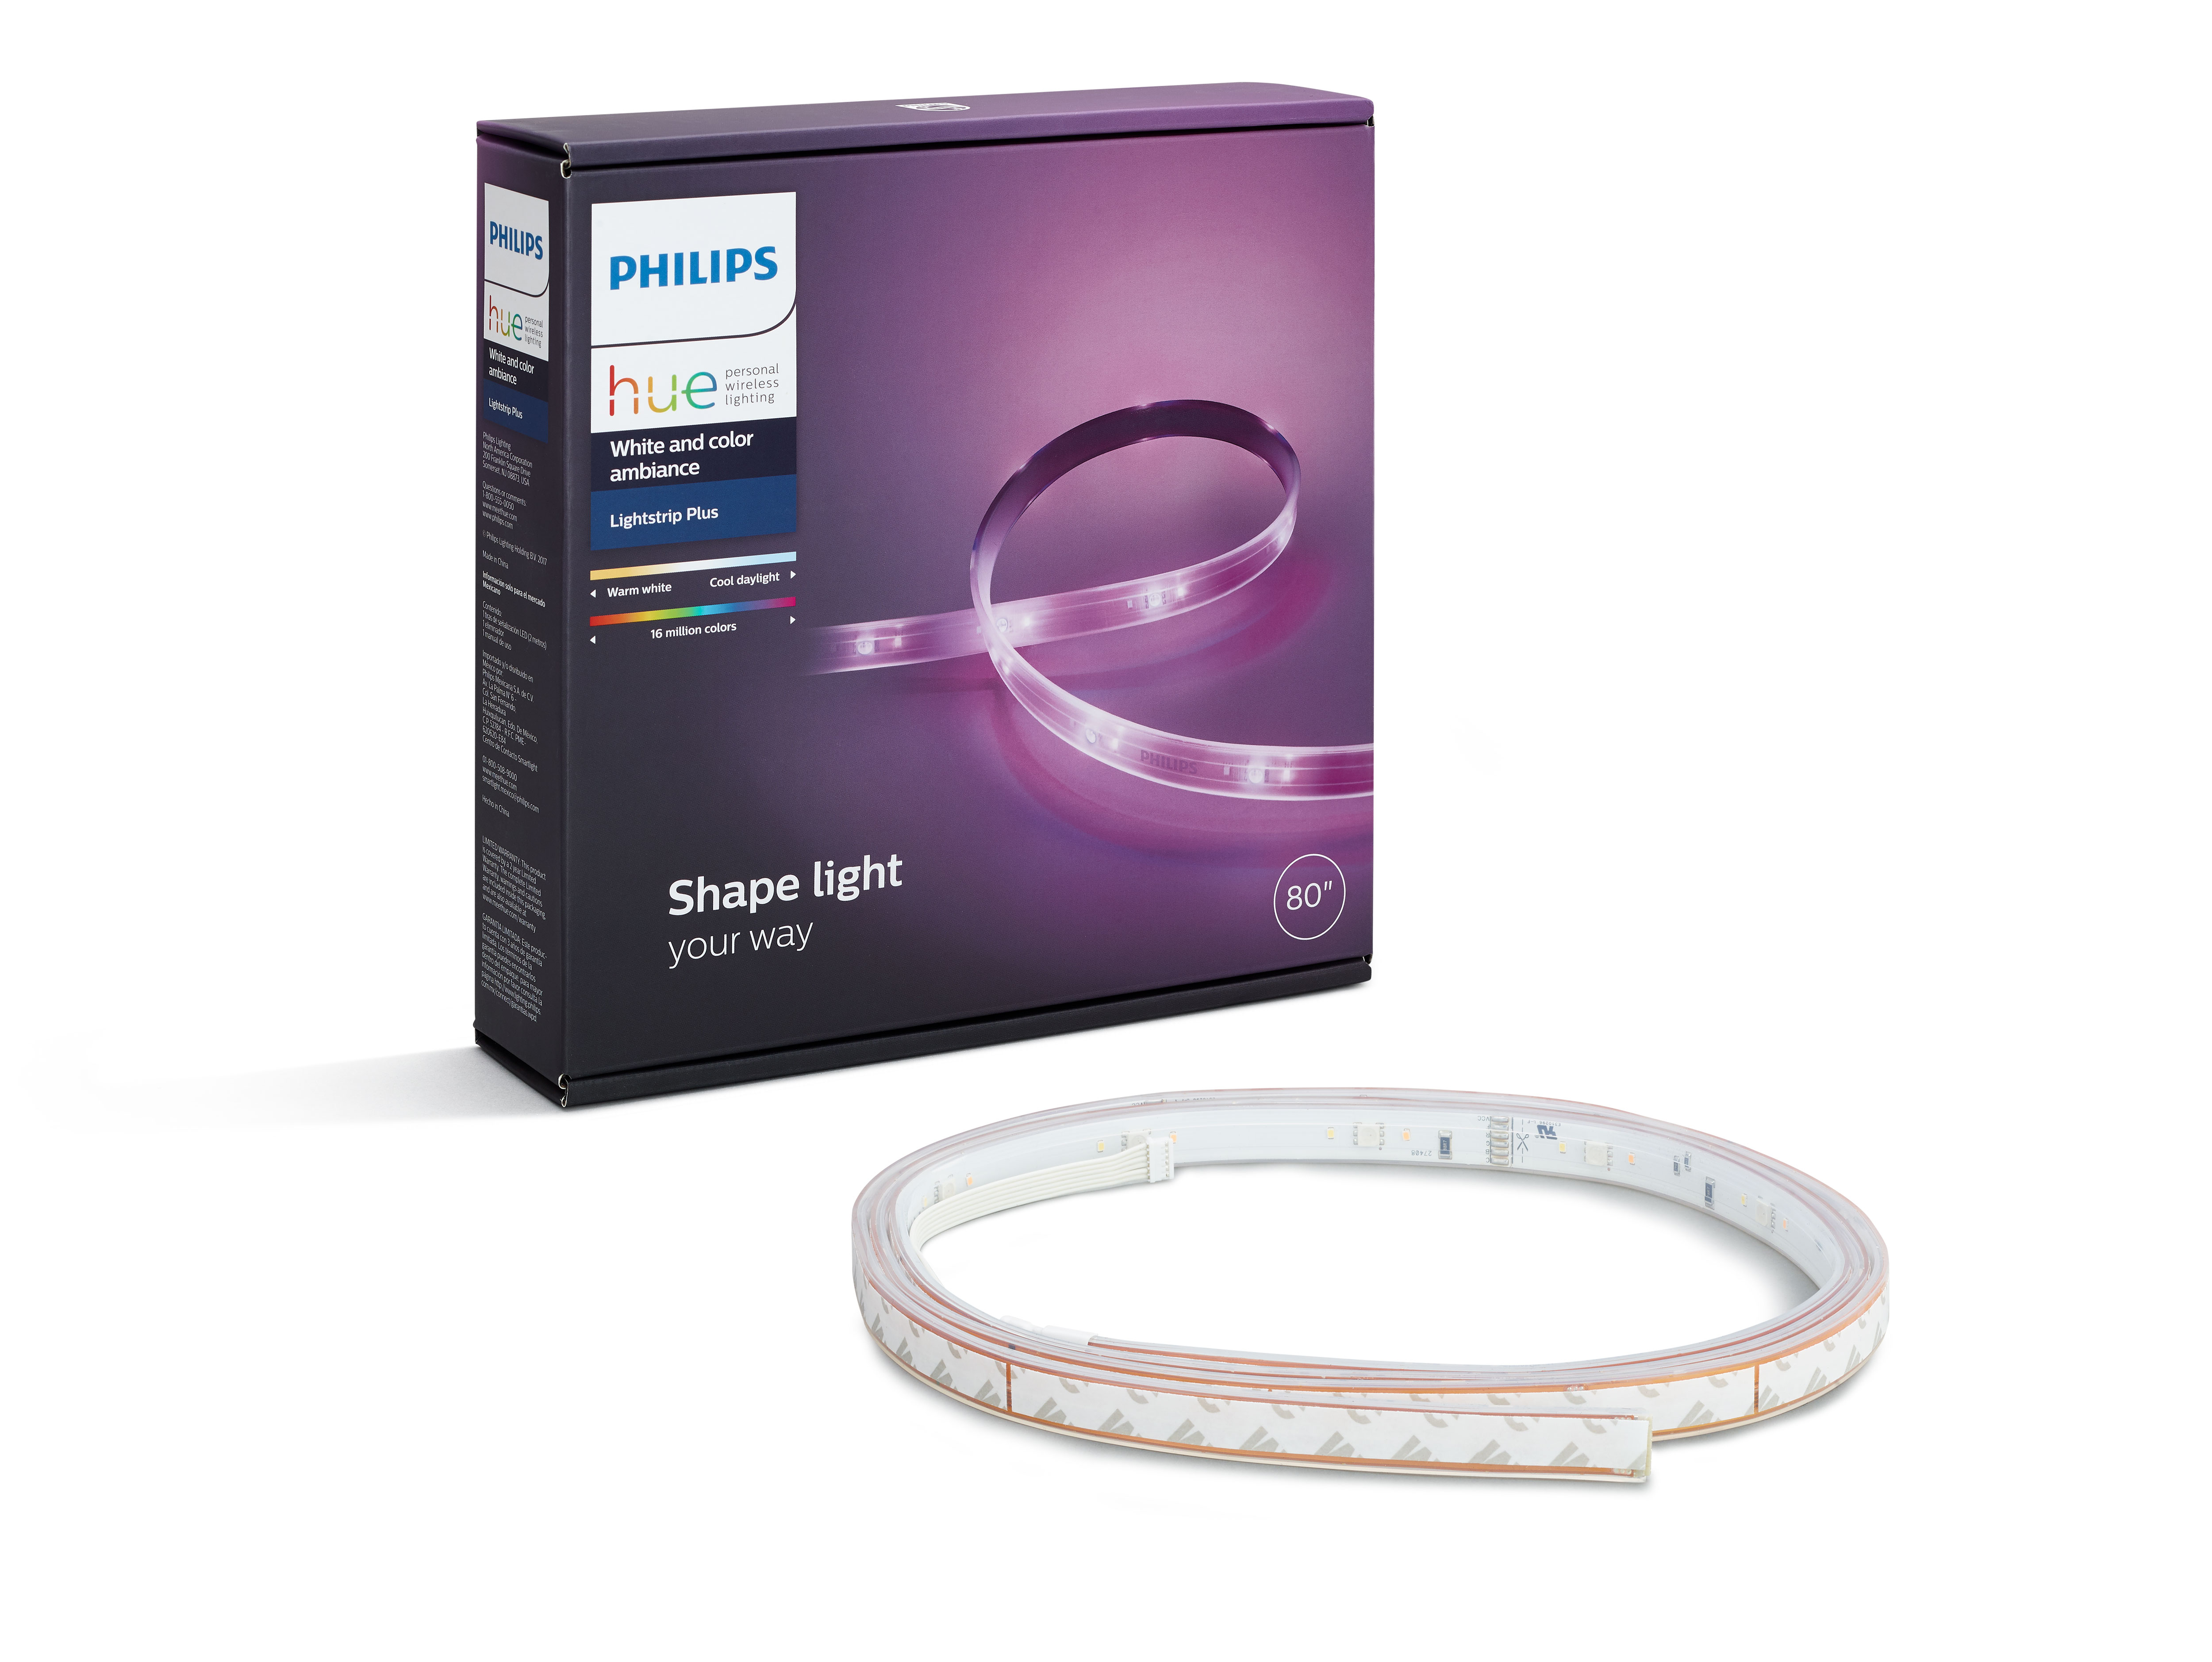 Philips Hue White and Color Ambiance Smart Indoor Light Strip Plus, 2m LED - image 4 of 11